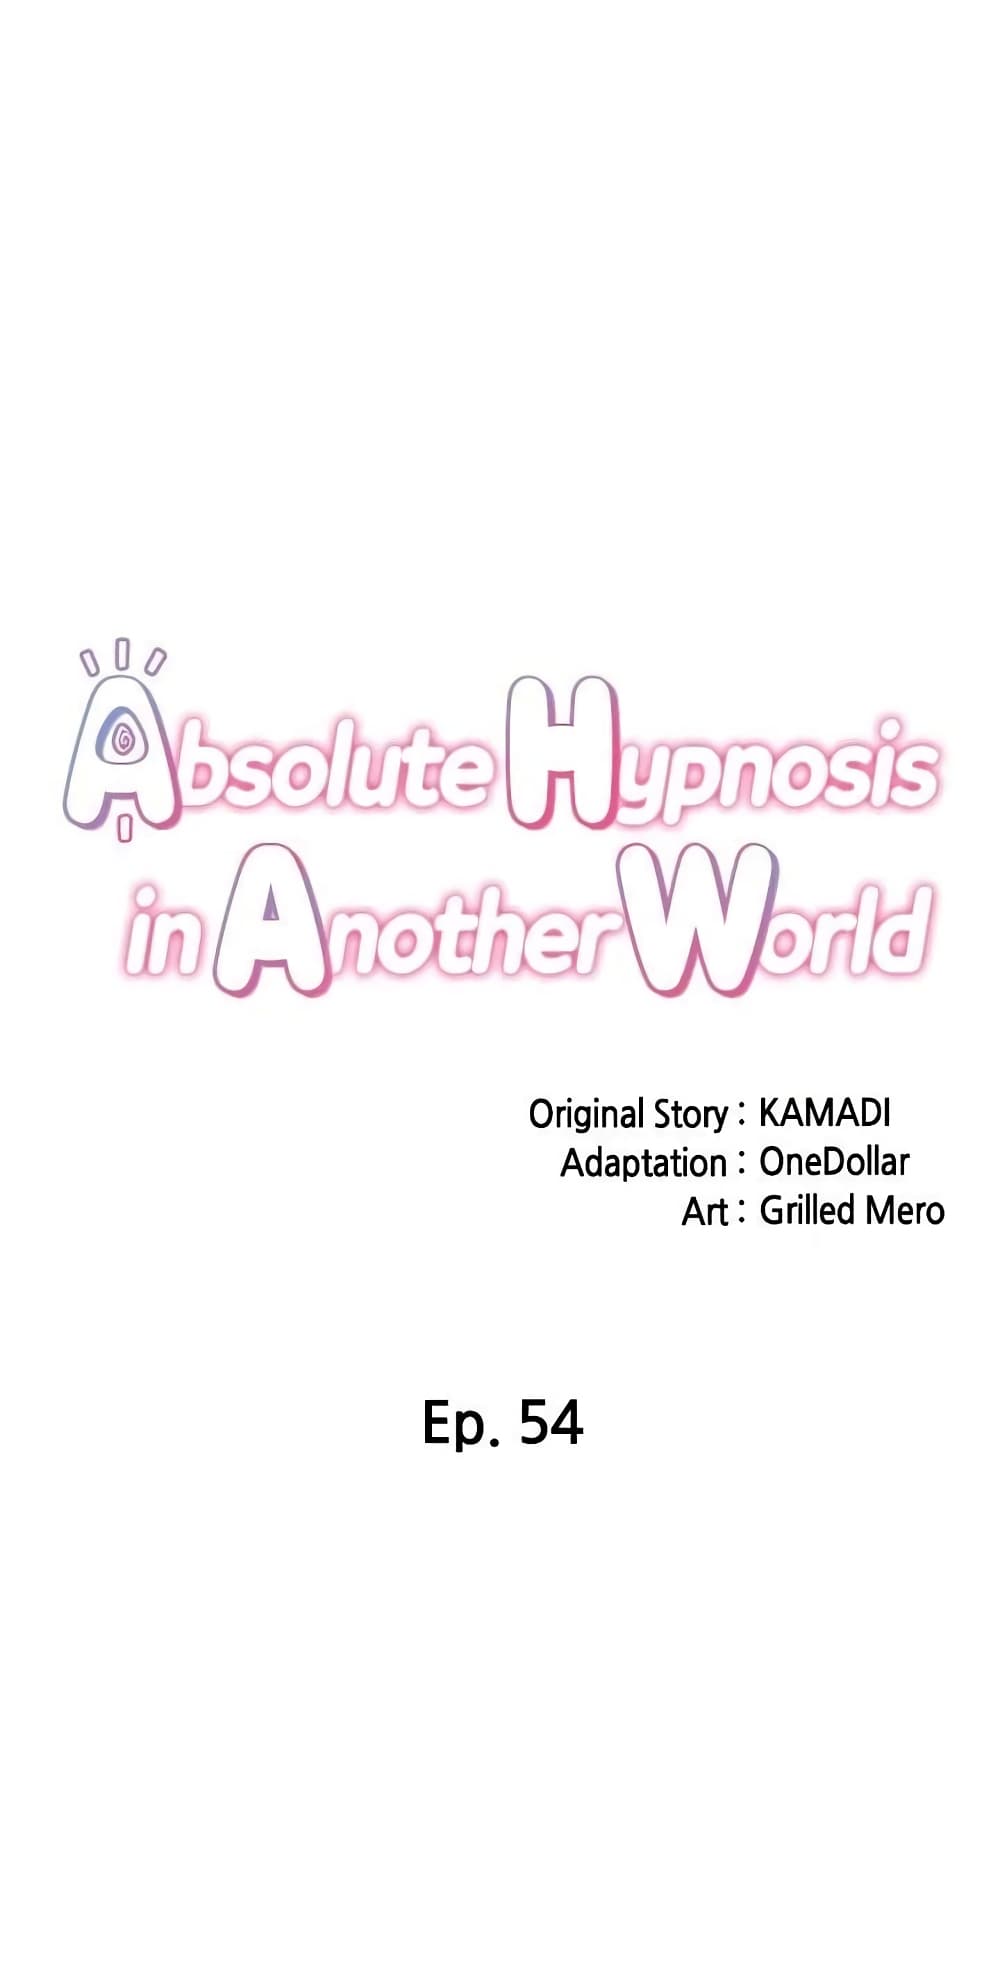 Absolute Hypnosis in Another World 54-54